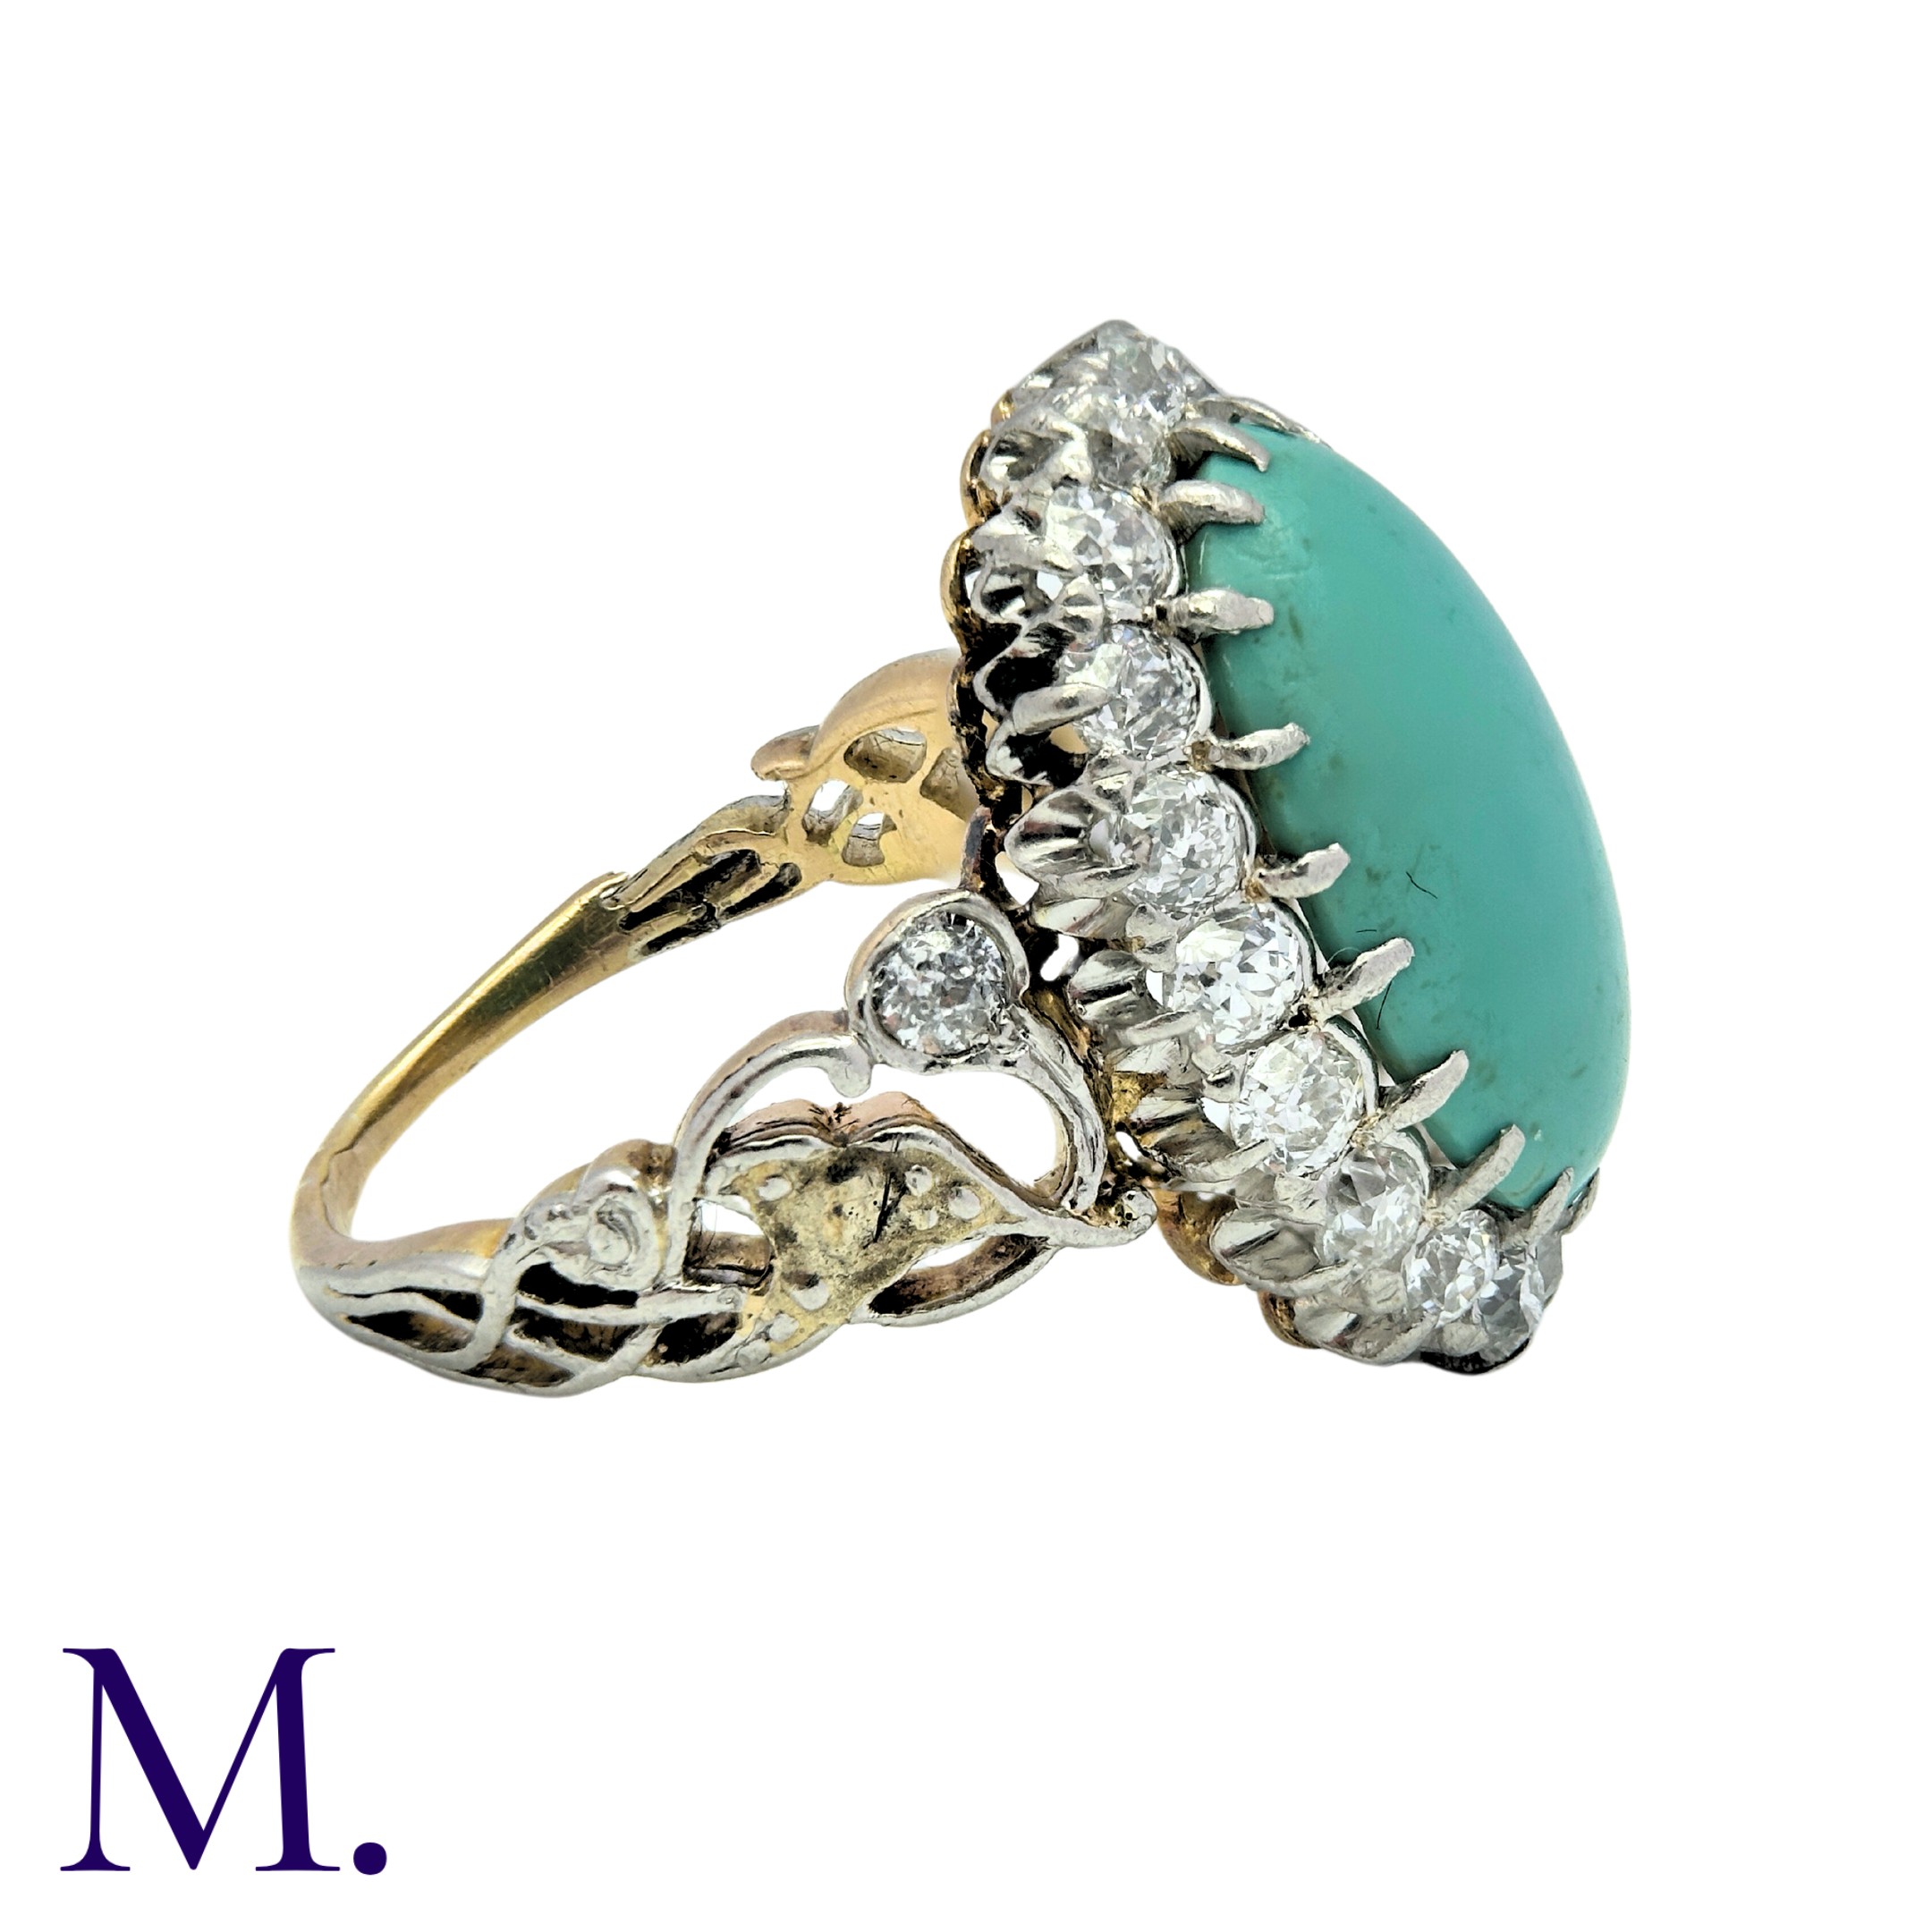 An Antique Turquoise and Diamond Cluster Ring in 18K yellow gold, set with an oval cabochon of - Image 3 of 3